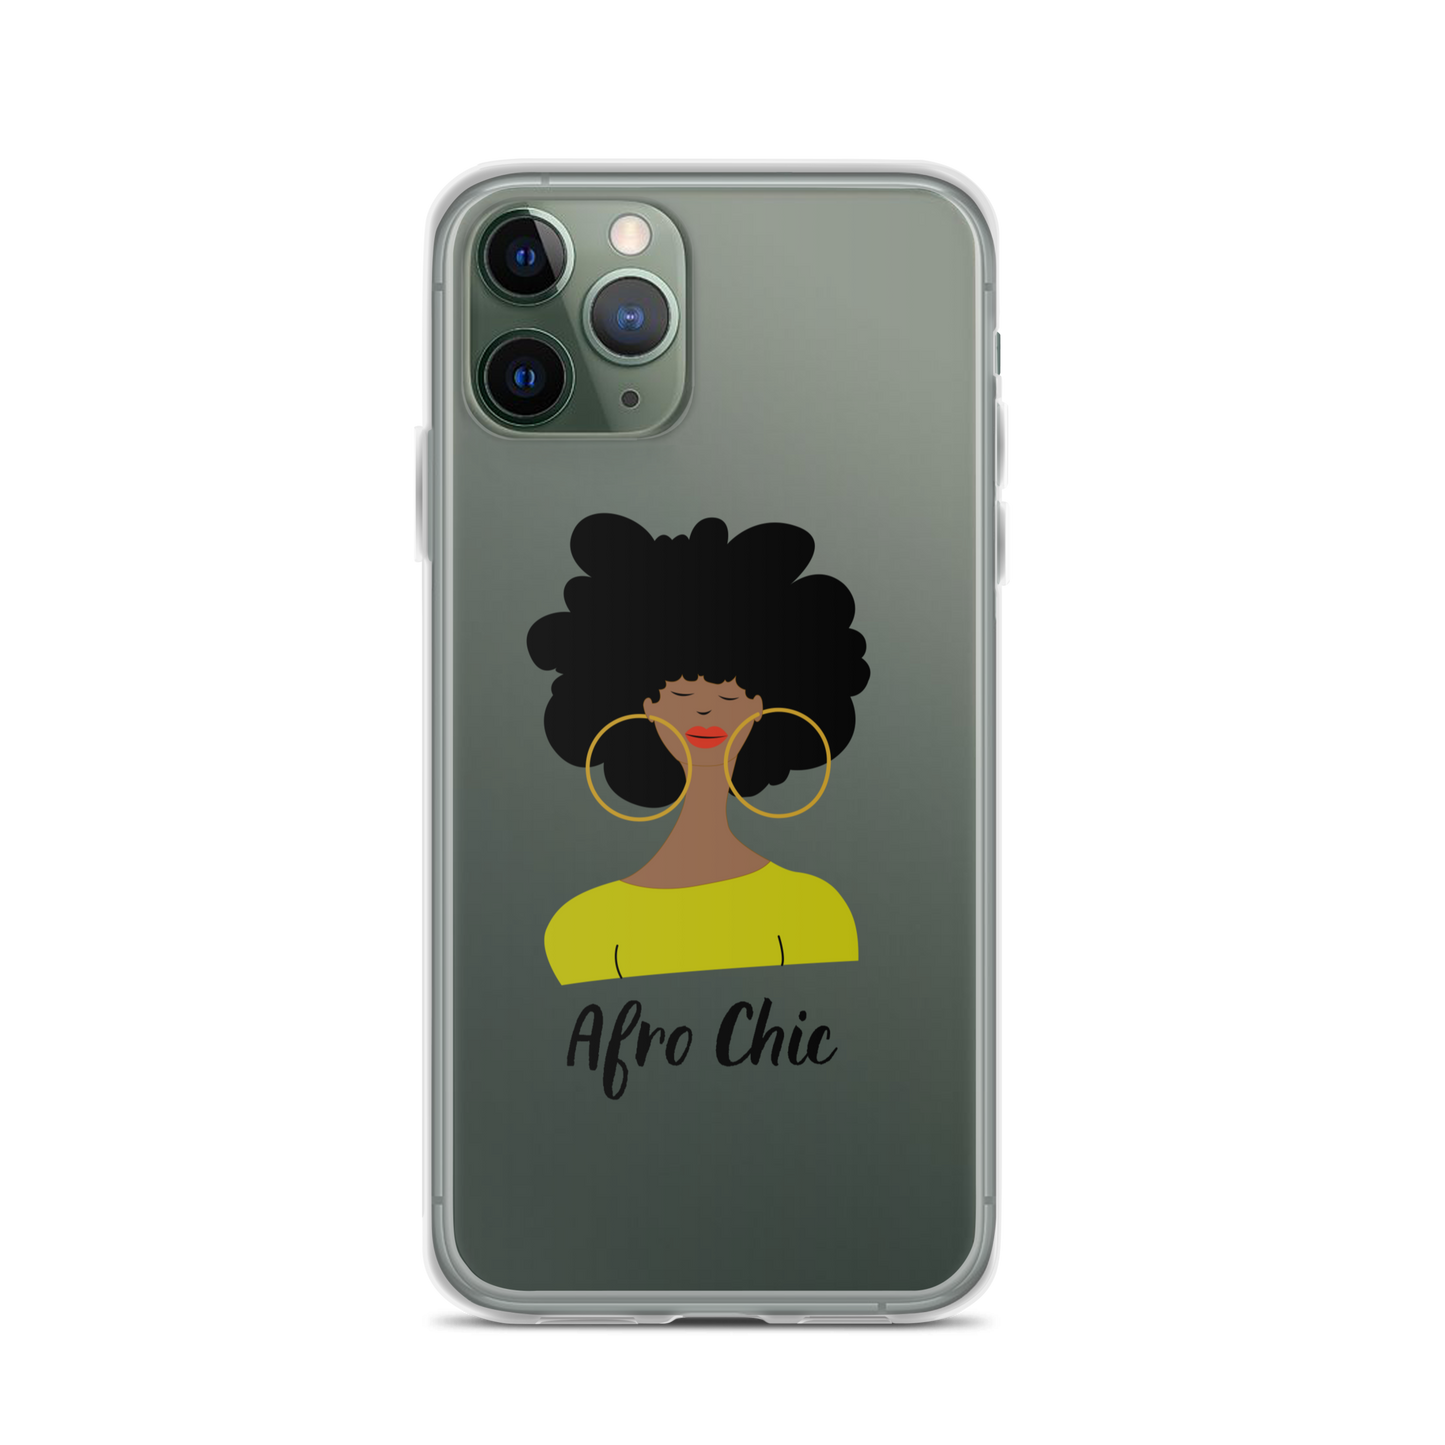 Afro Chic iPhone Case